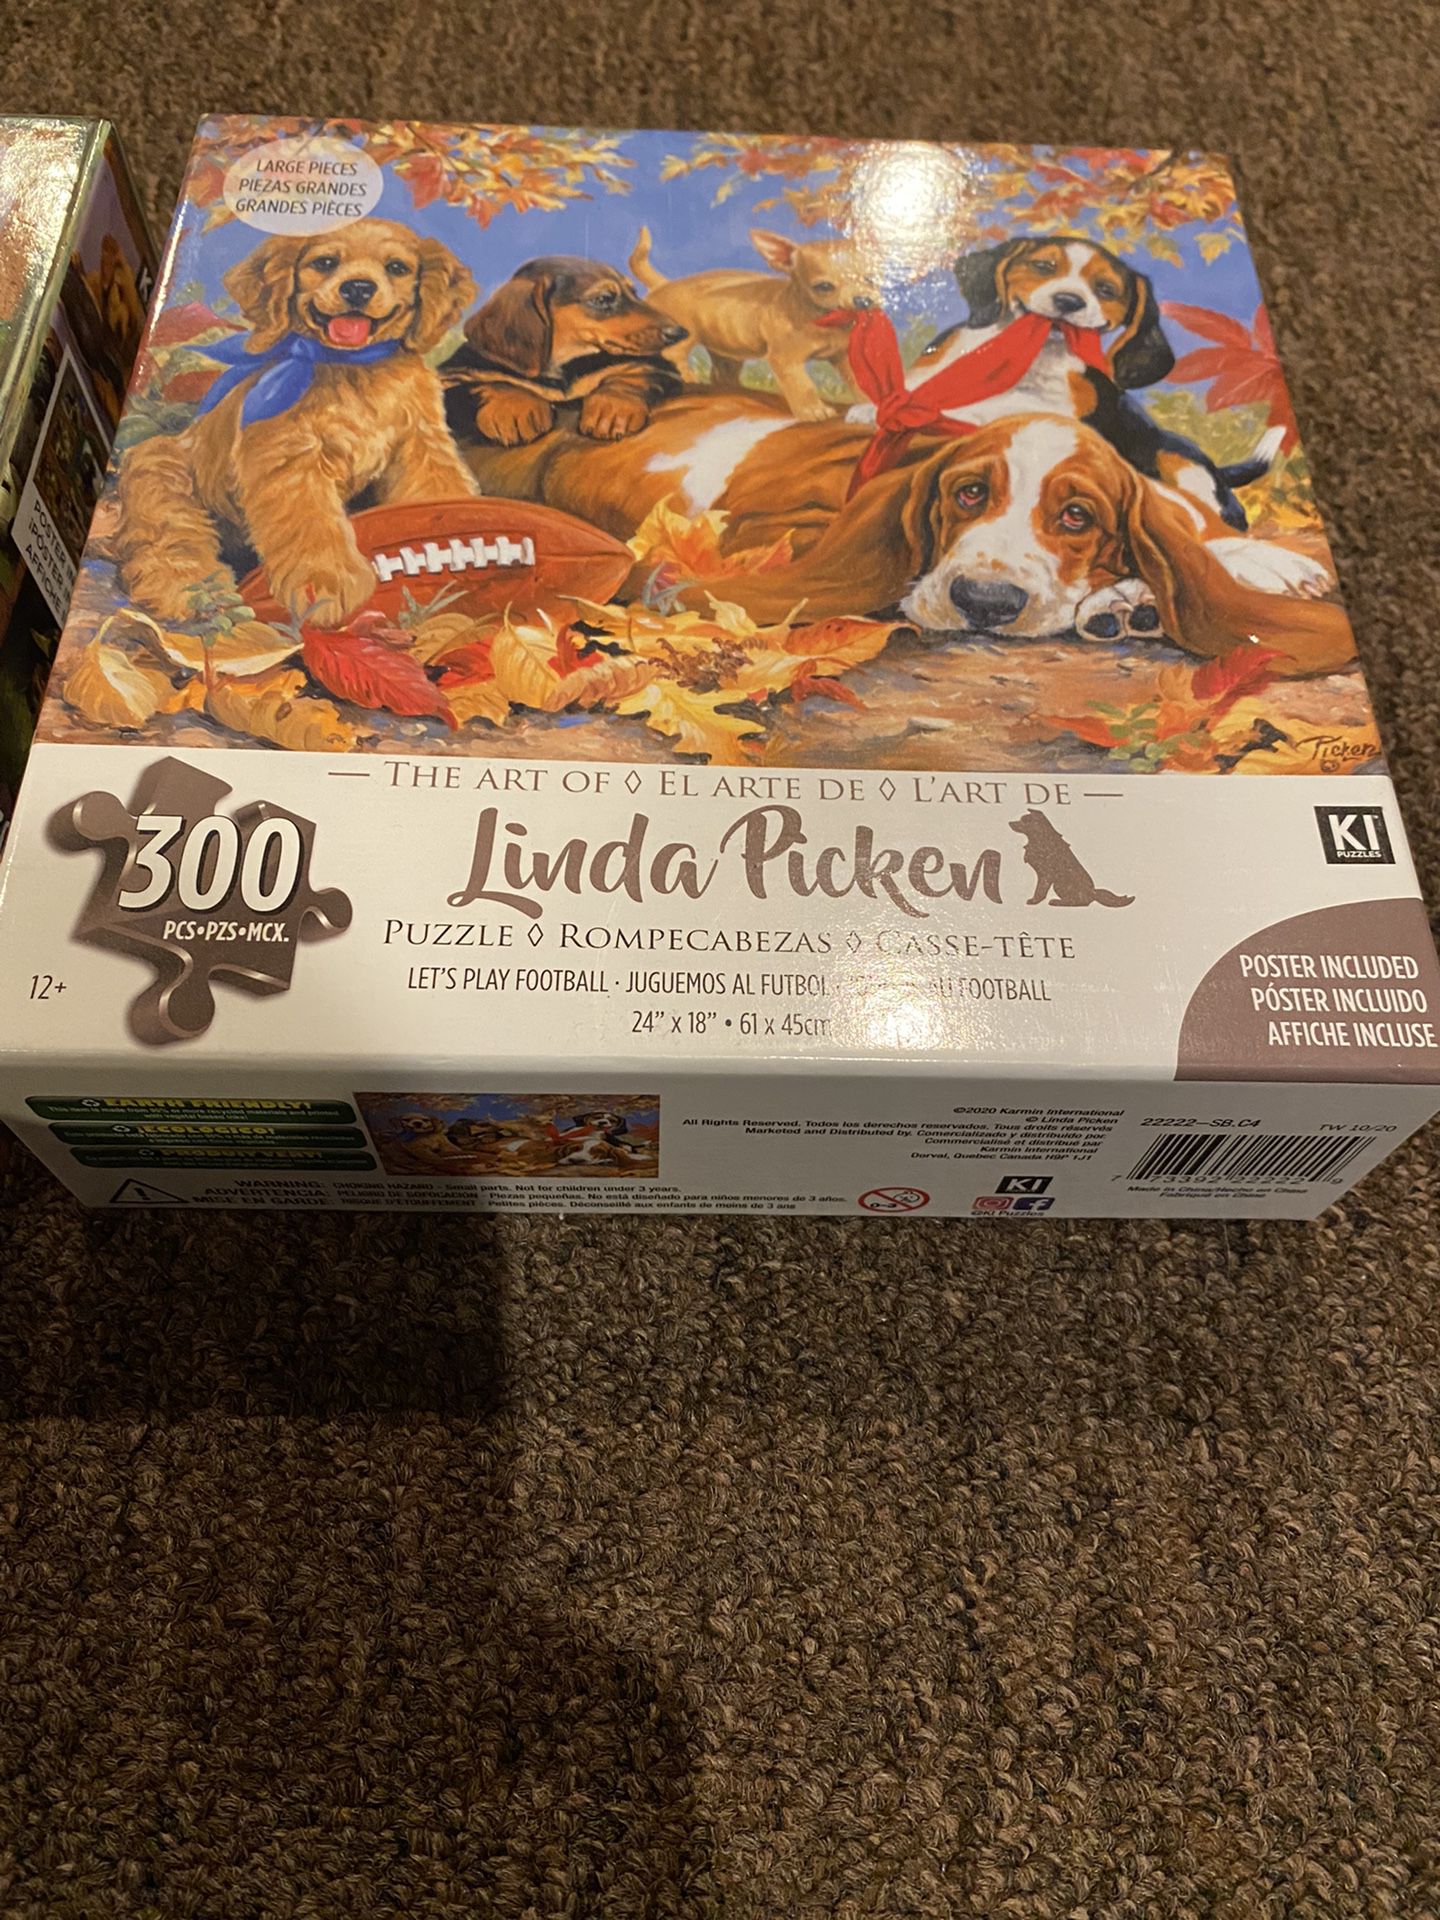 GET 2 Puzzles! Brand NEW SEALED Linda Picken! Gift for dog lovers ! Sports Puppy Collage & let’s play football!